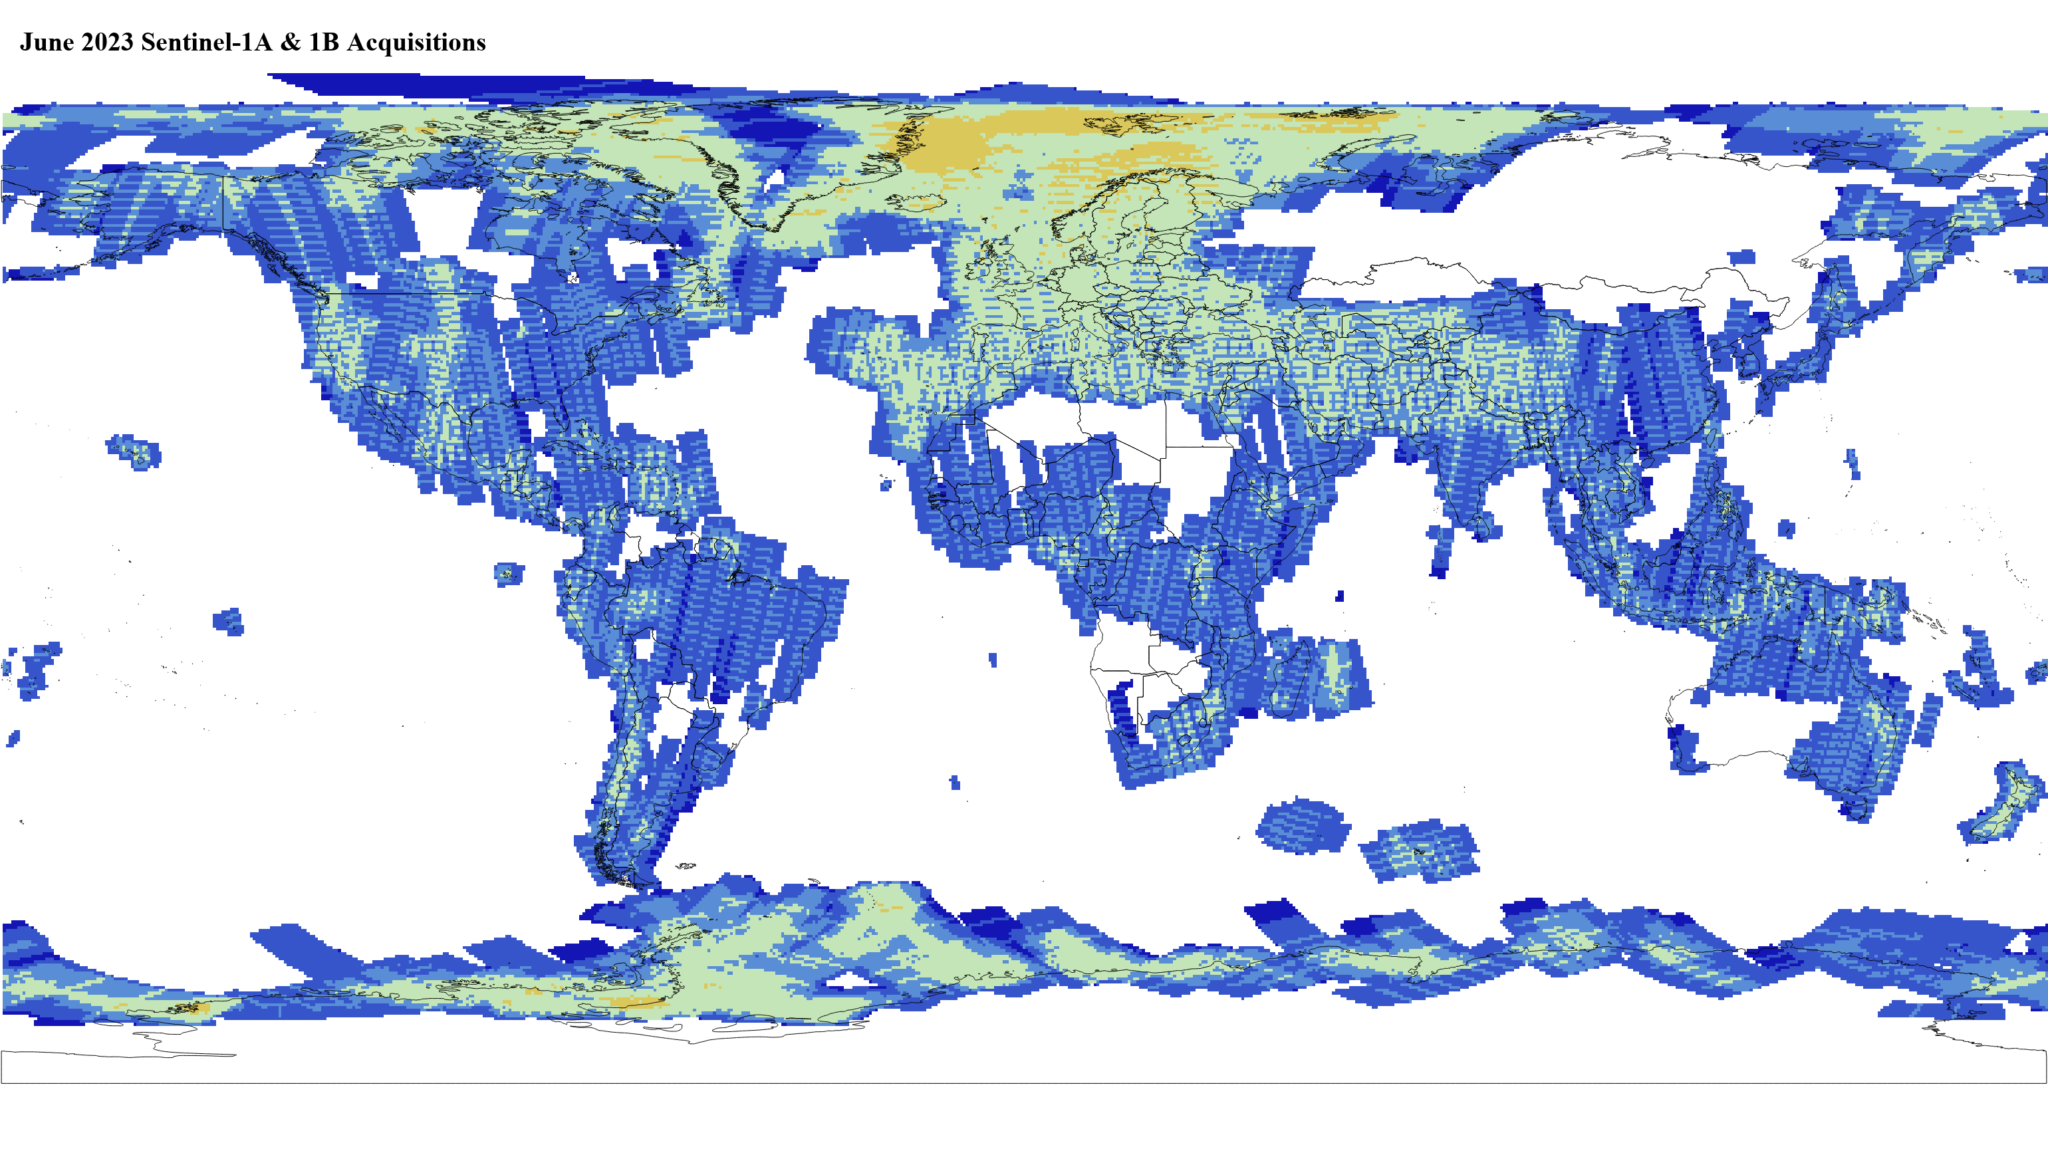 Heat map of Sentinel-1A and -1B GRD global acquisitions June 2023